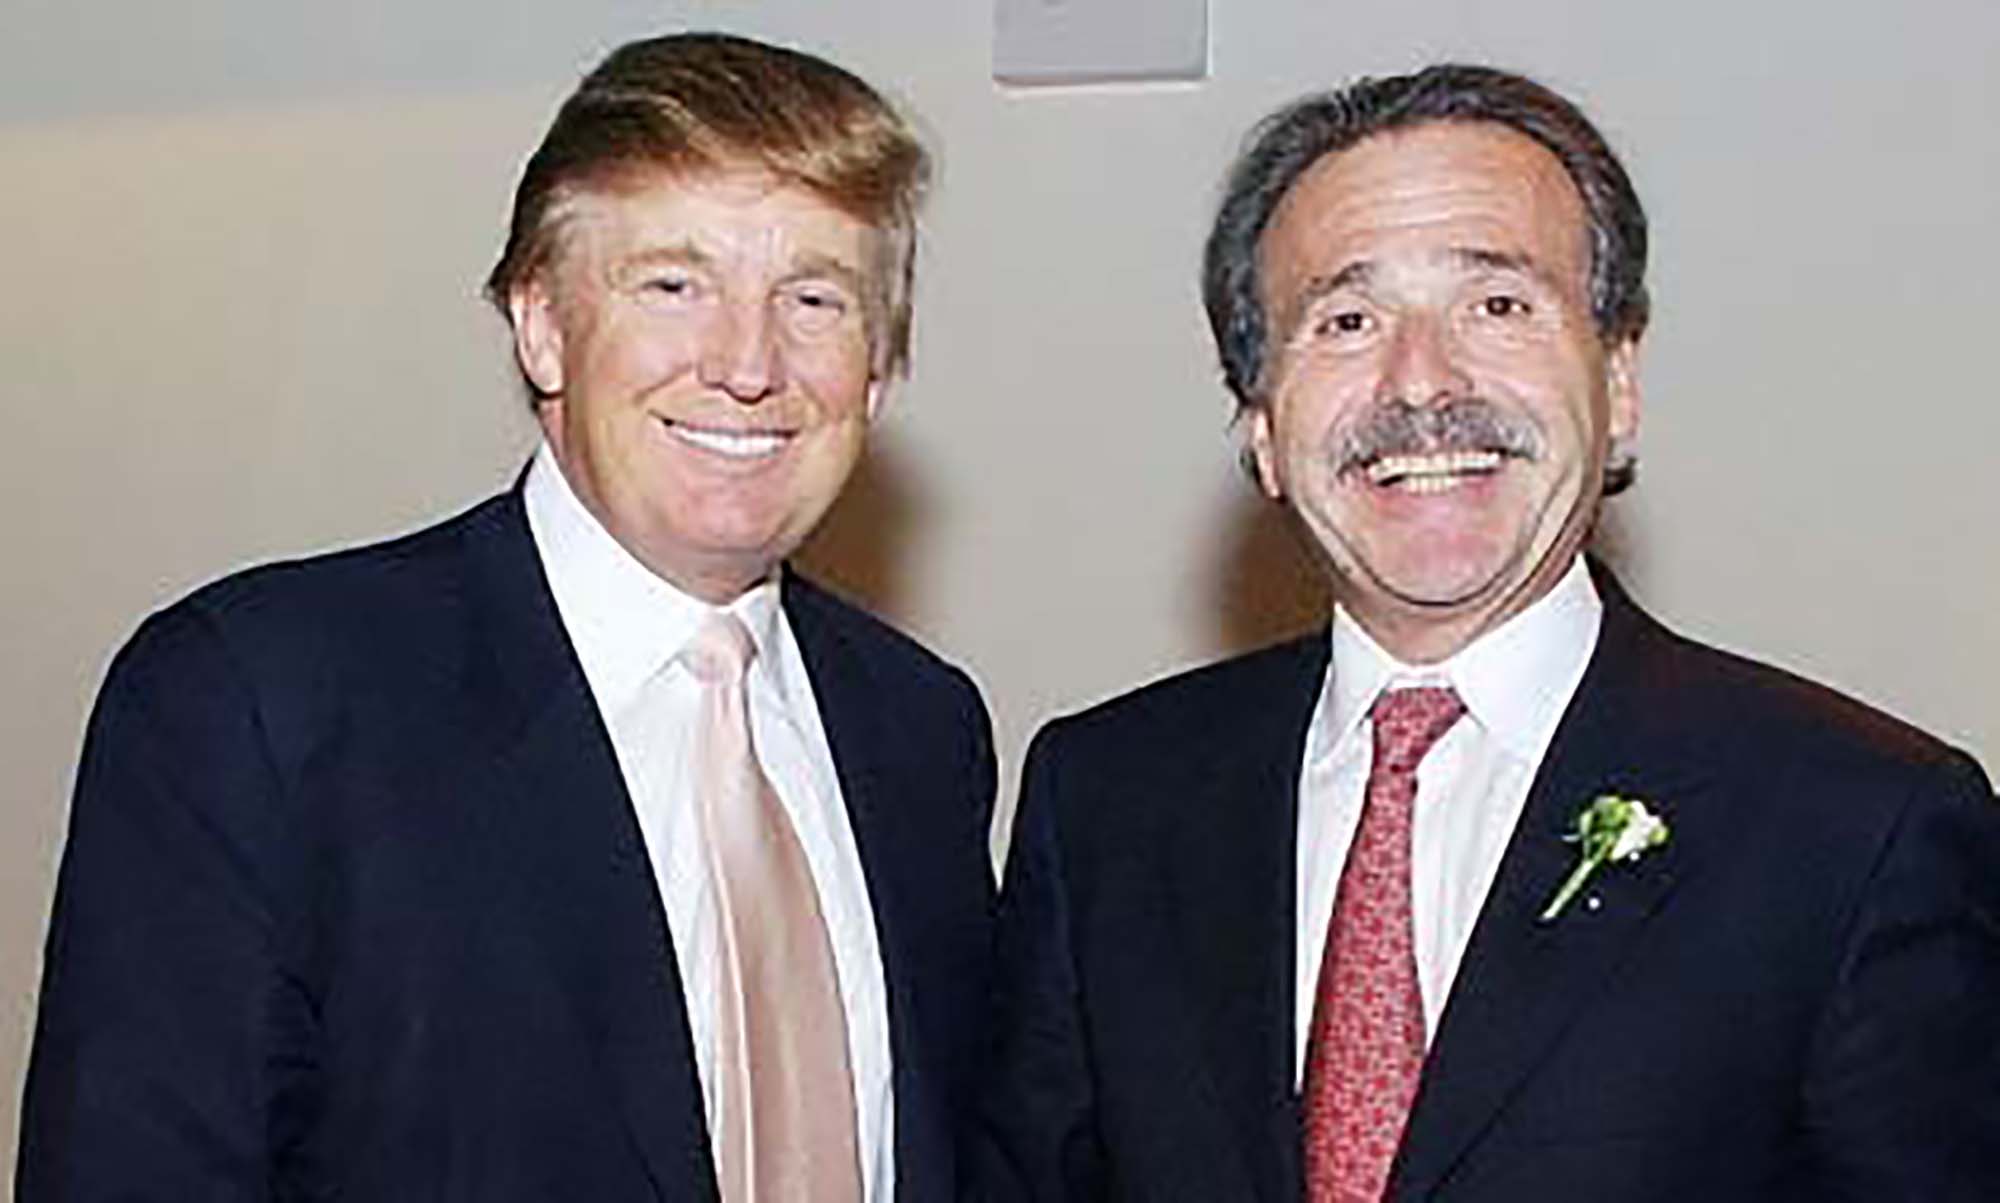 David Pecker Subject to Swatting Incident on Day of Trump Trial Testimony